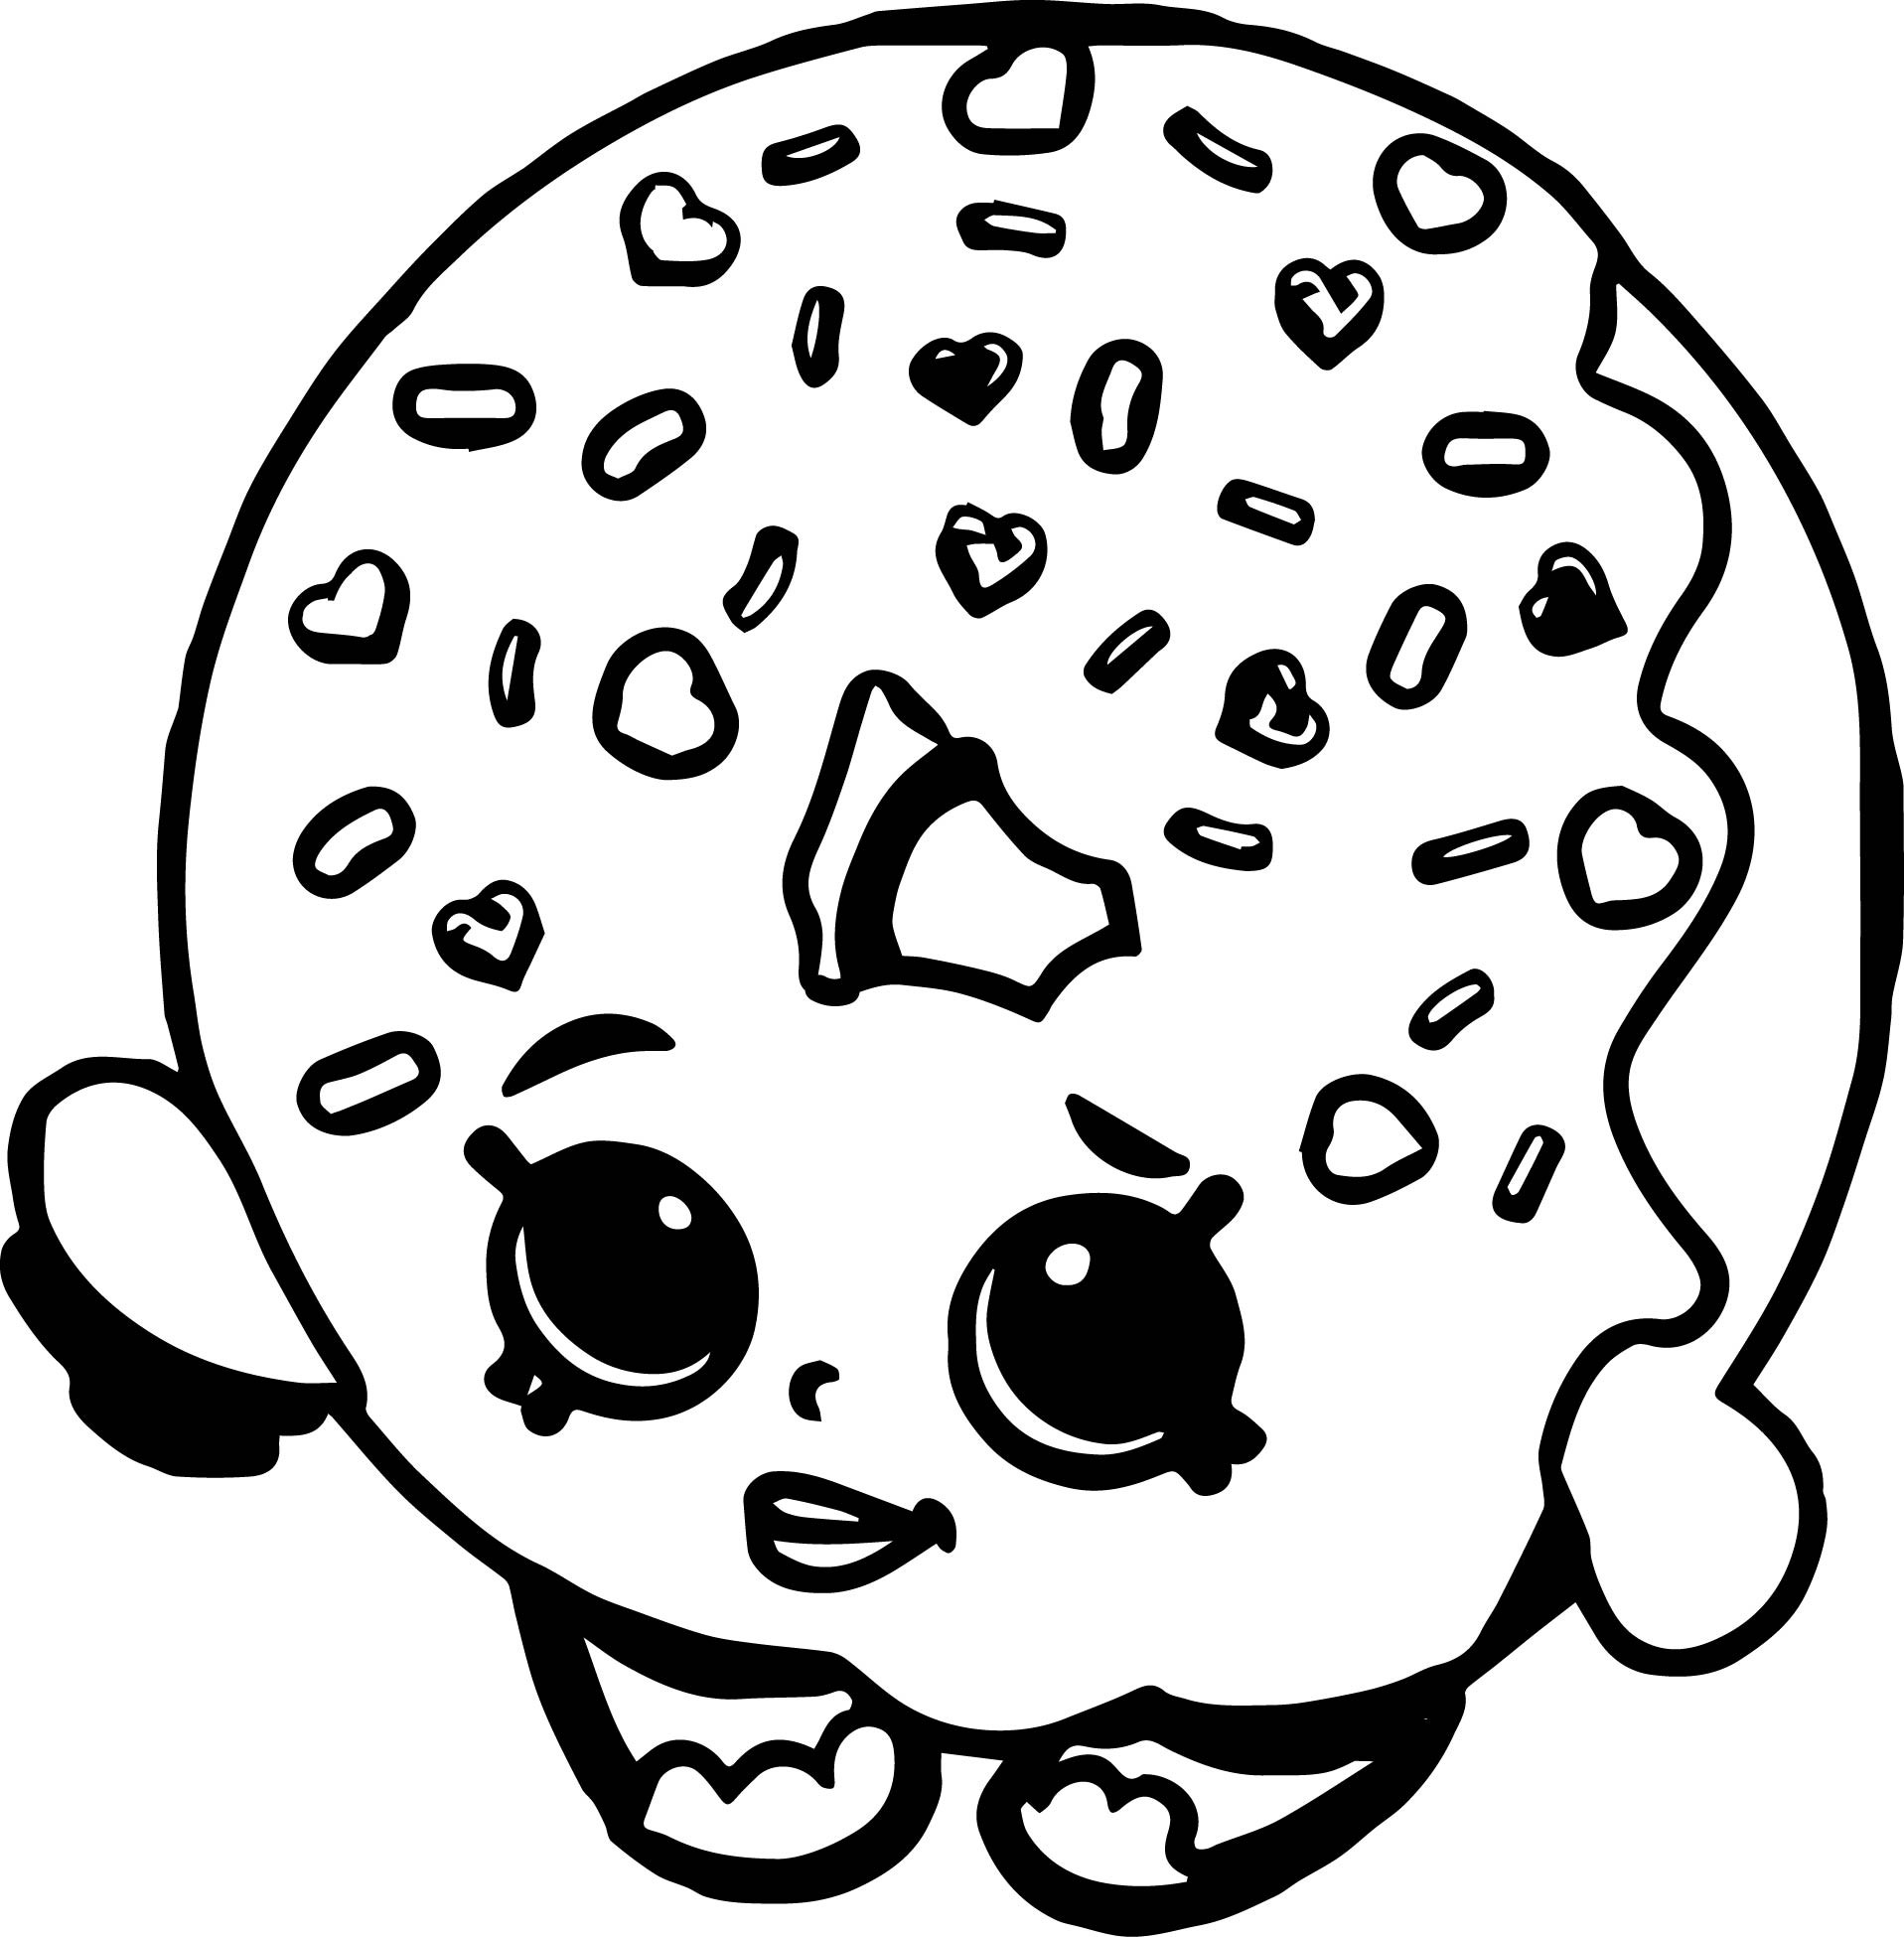 Donuts Coloring Pages
 Shopkins Donut Cartoon Coloring Page